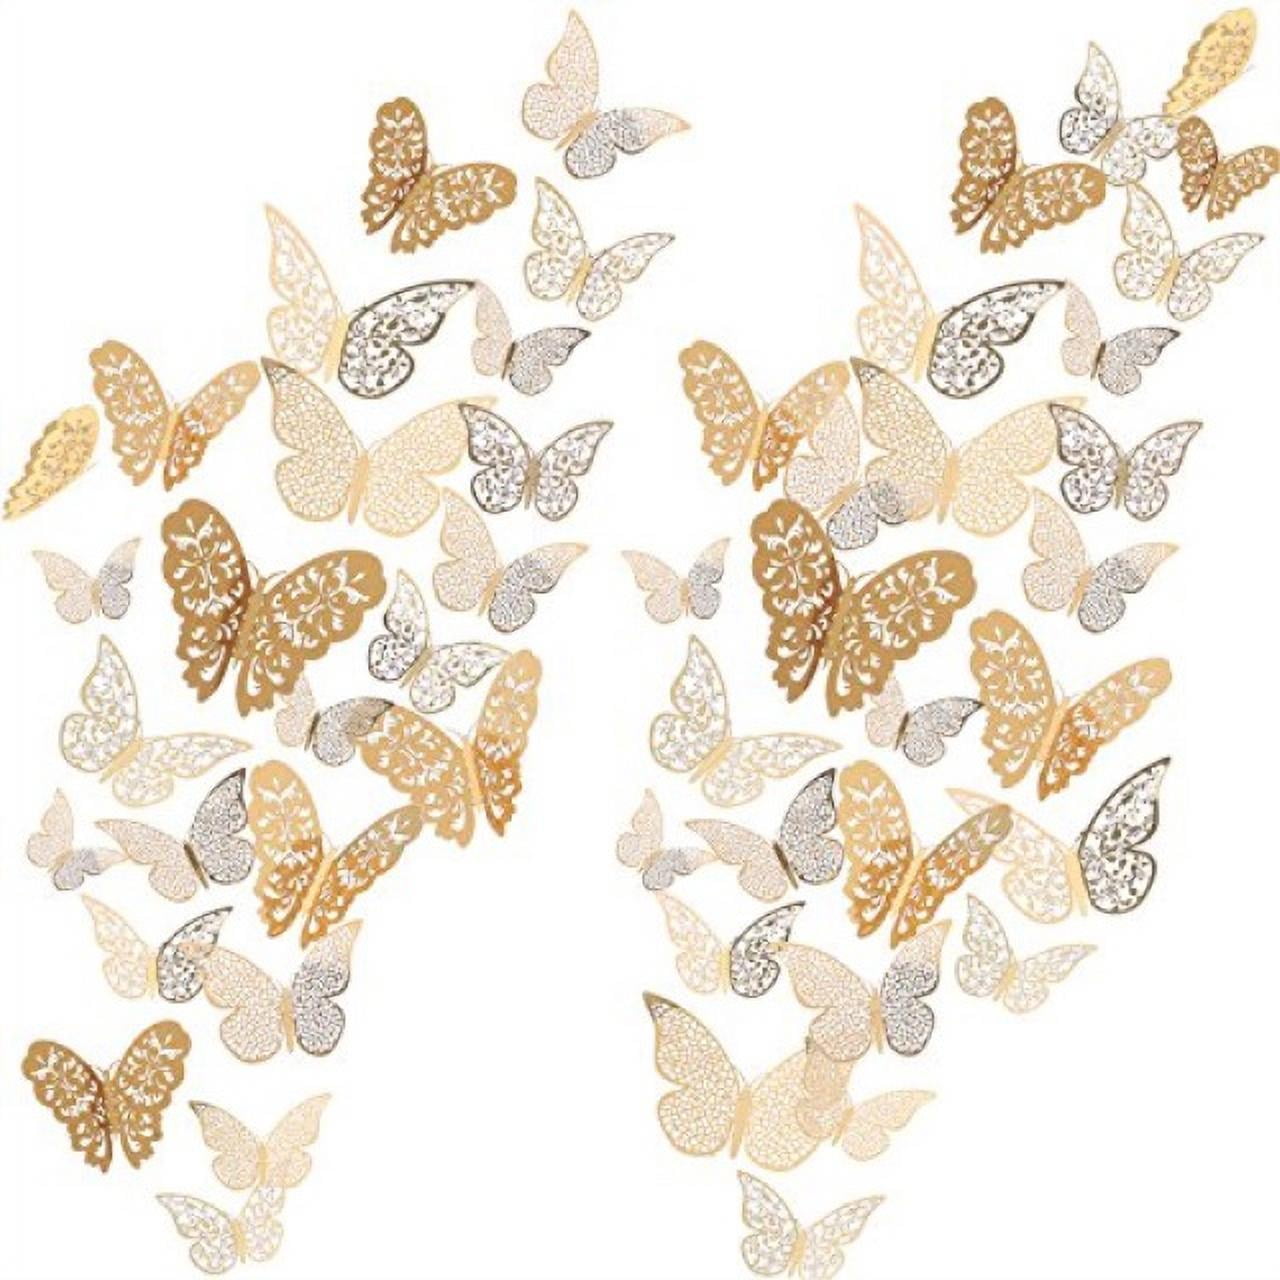 Silver Bememo 72 Pieces 3D Butterfly Wall Decals Sticker Wall Decal Decor Art Decorations Sticker Set 3 Sizes for Room Home Nursery Classroom Offices Kids Girl Boy Bedroom Bathroom Living Room Decor